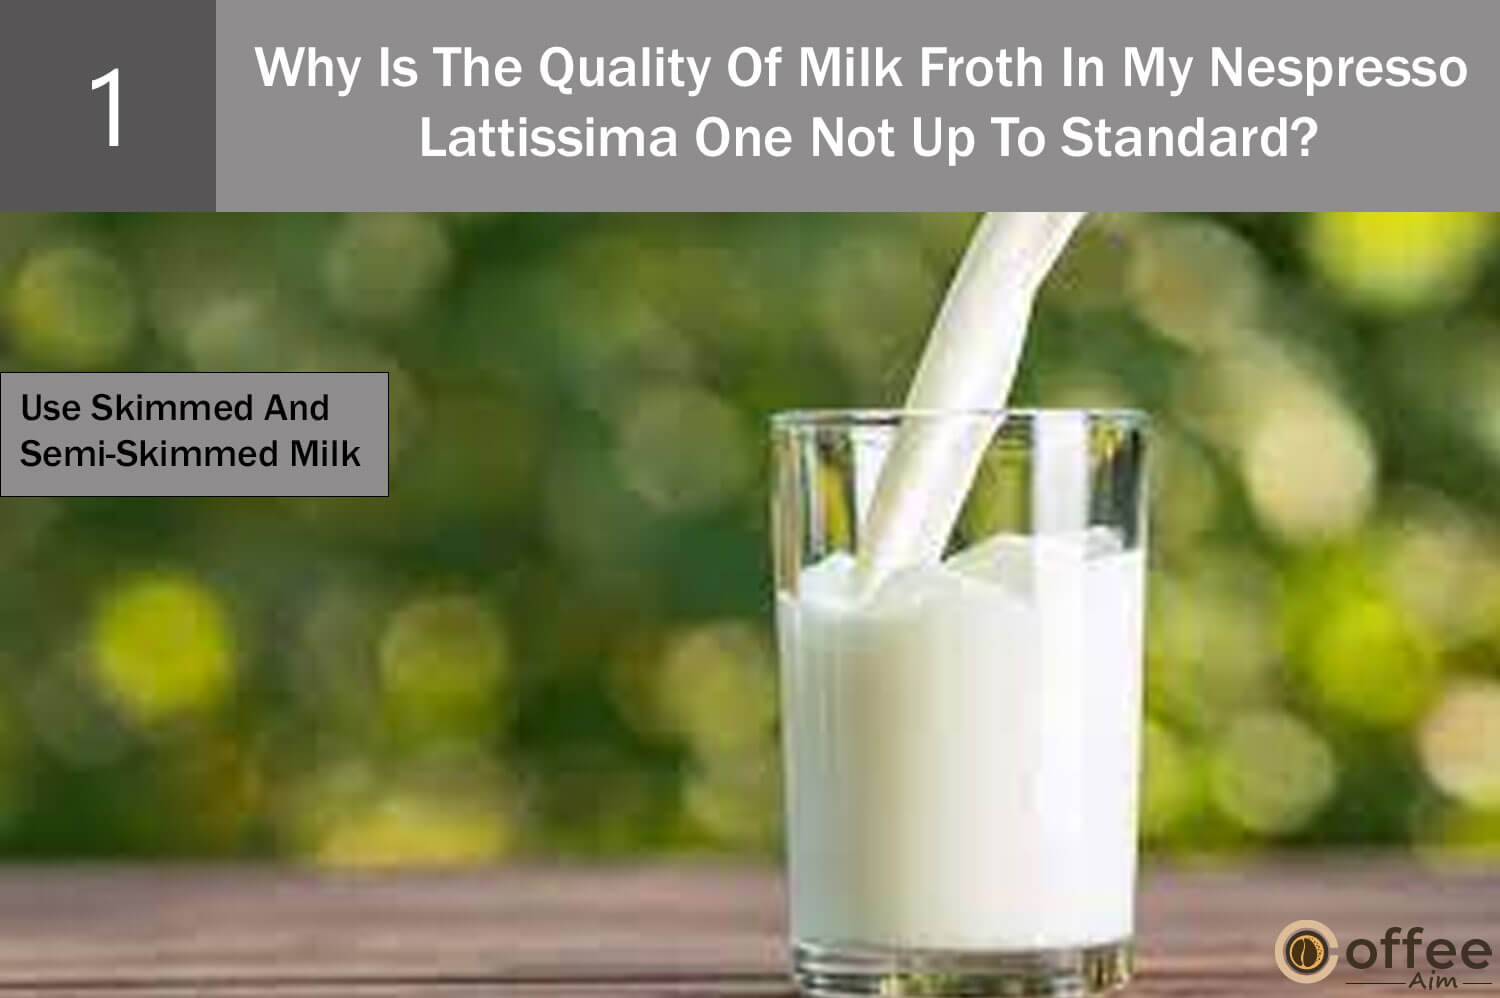 For best frothing results, opt for skimmed or semi-skimmed milk with higher casein protein and lower fat content. Freshly opened milk ensures a stable and thick foamy texture.